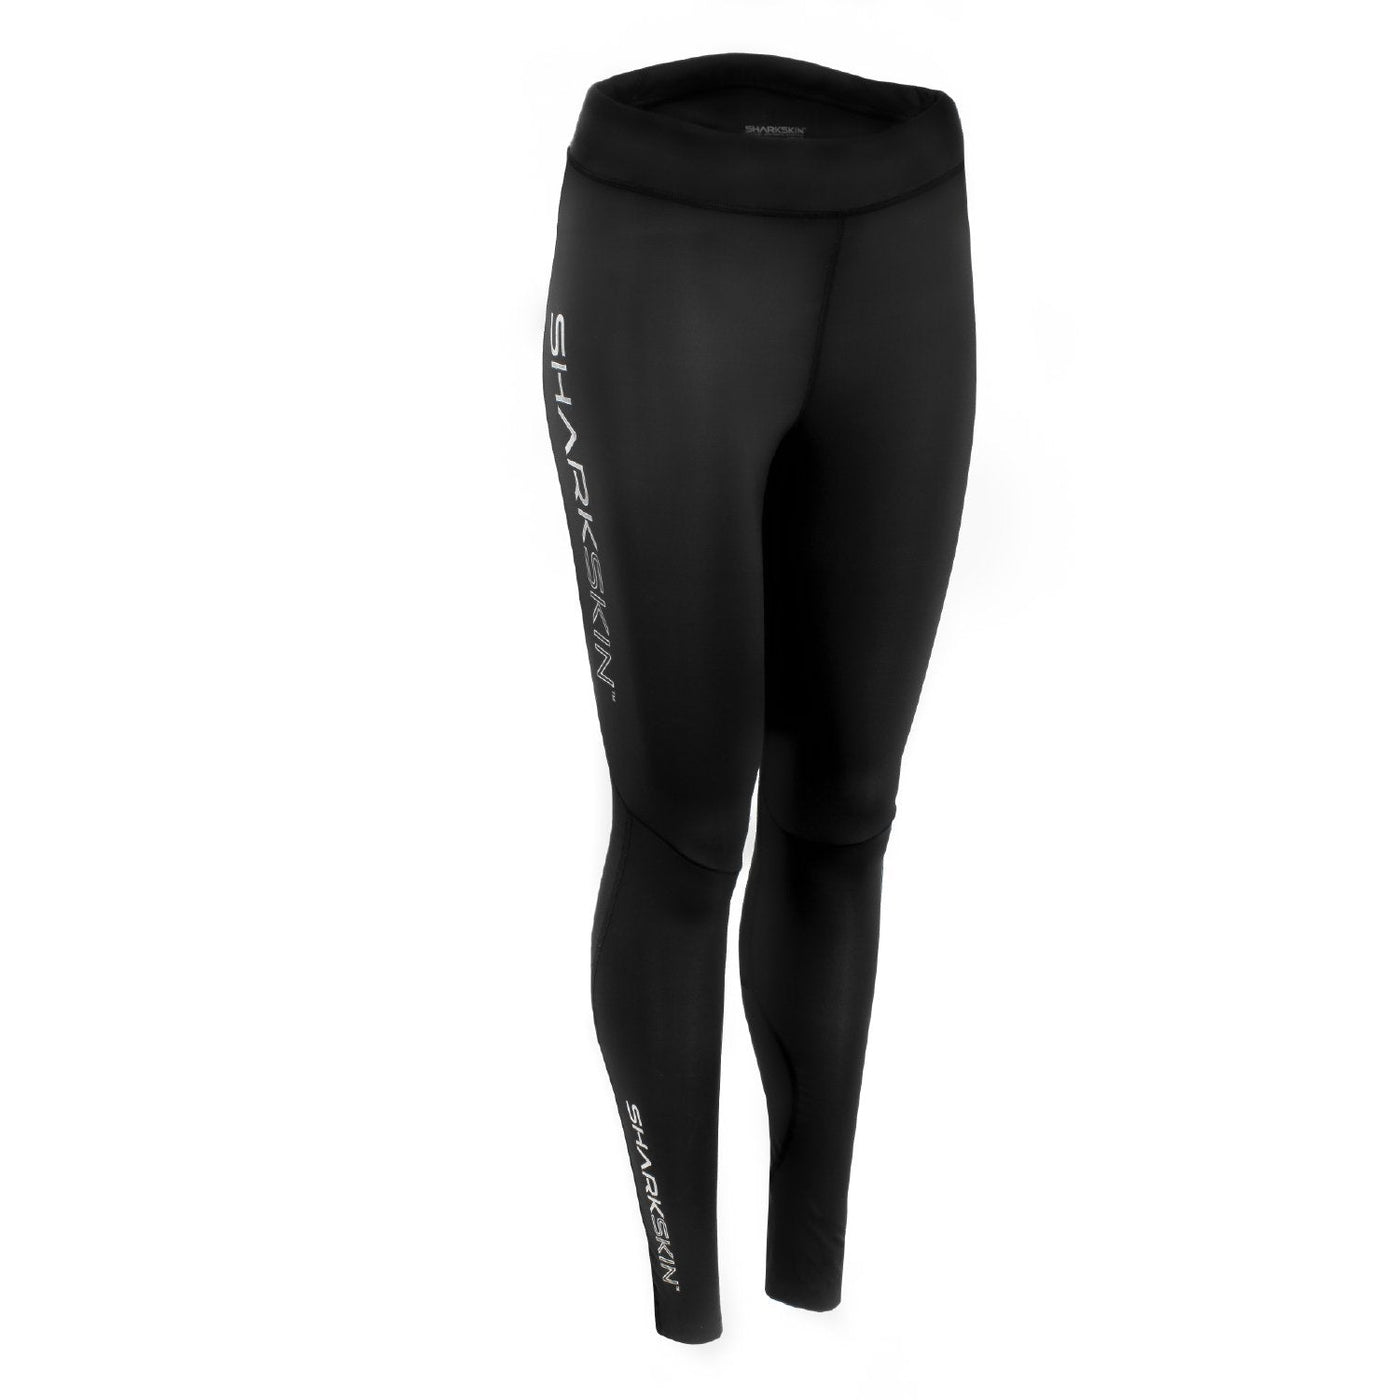 R-SERIES COMPRESSION LONG PANTS - WOMENS (SECONDS)